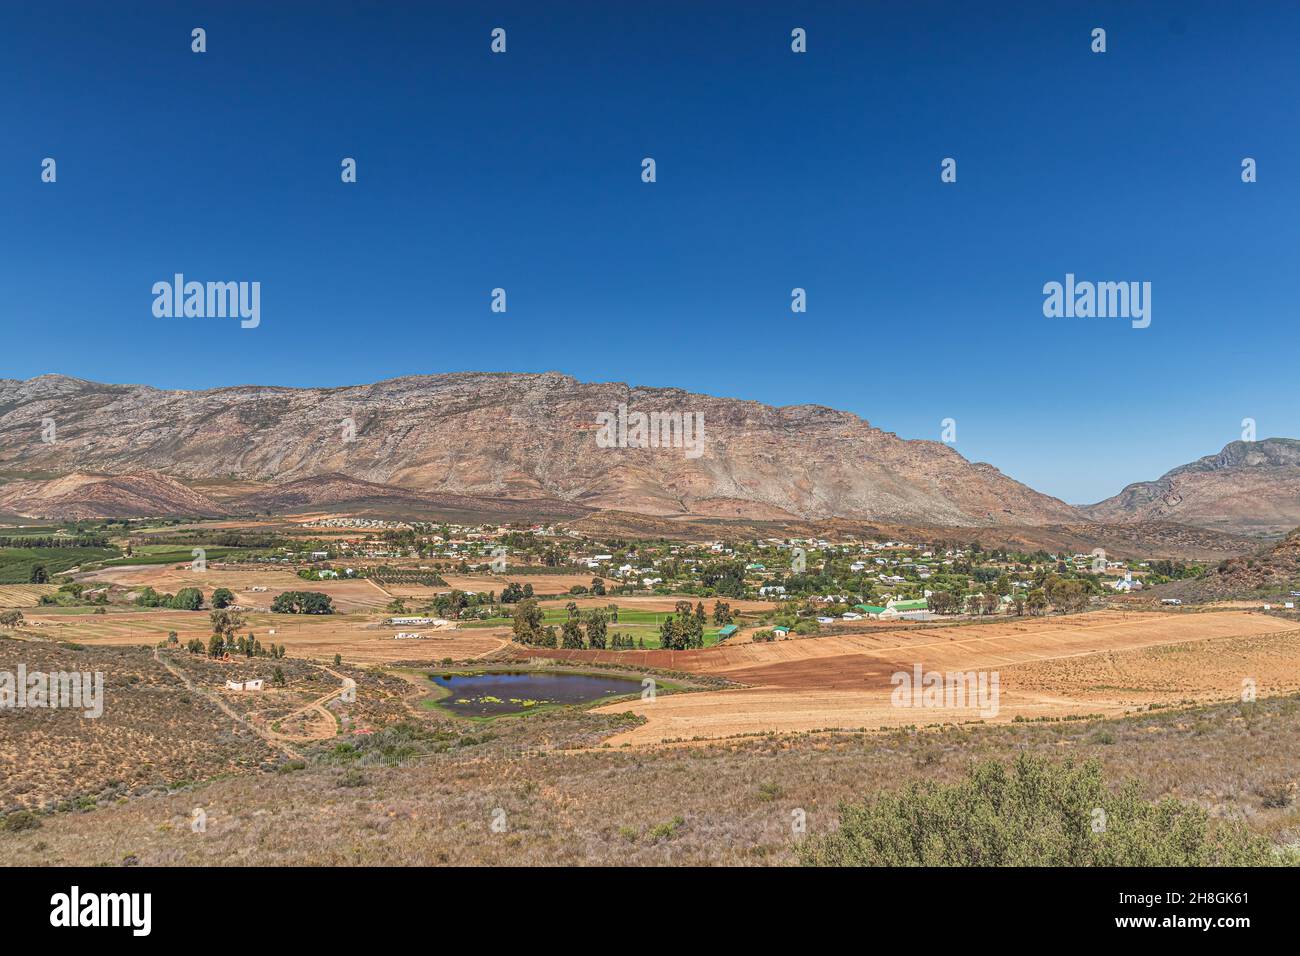 The view of Barrydale, a village along Route 62 which located at the border of the Overberg and Klein Karoo regions in Western Cape, South Africa. Stock Photo